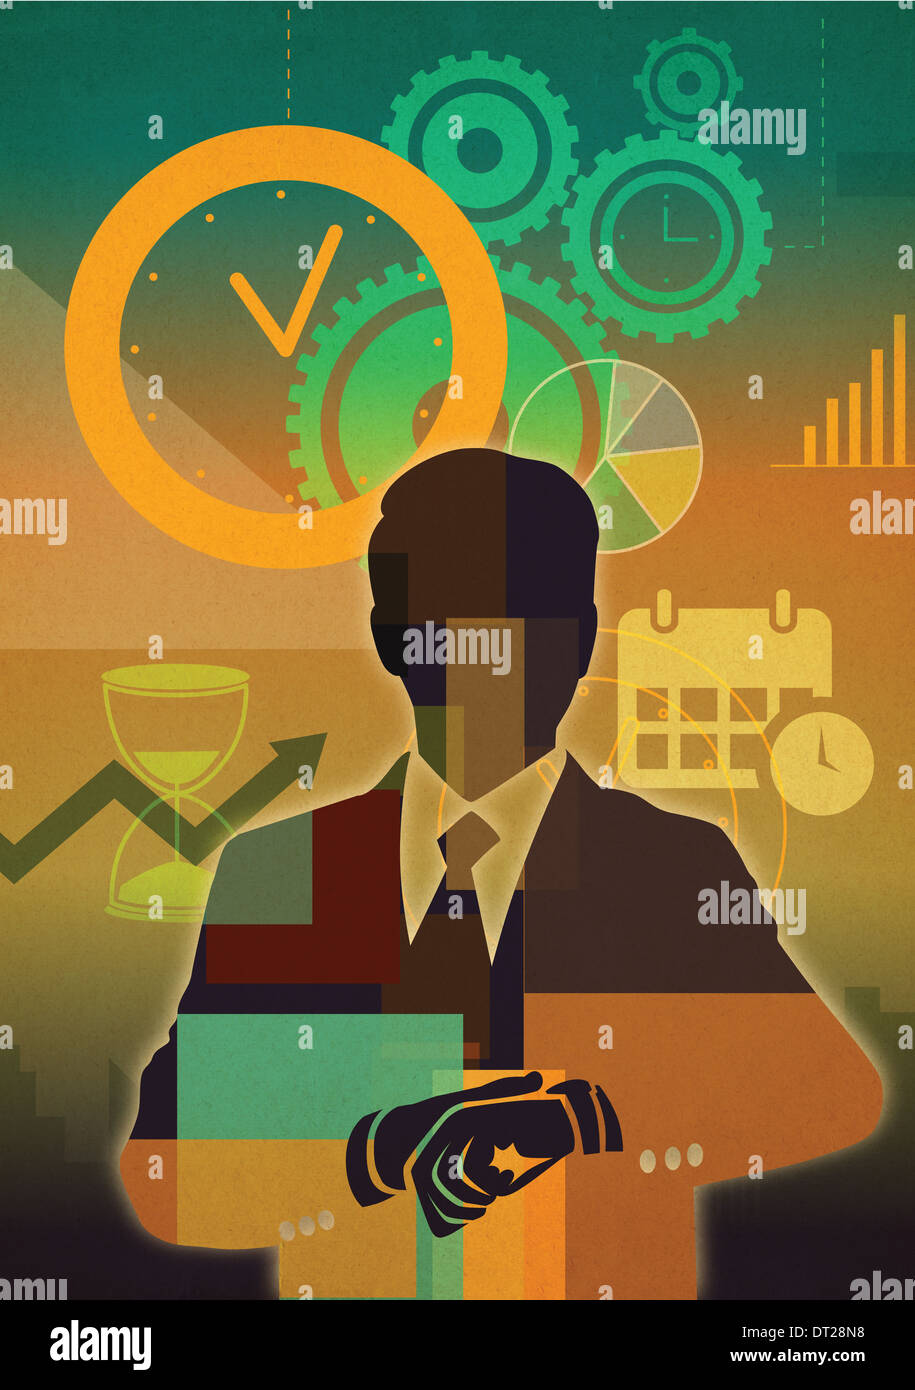 Illustrative image of businessman with clock representing time management Stock Photo